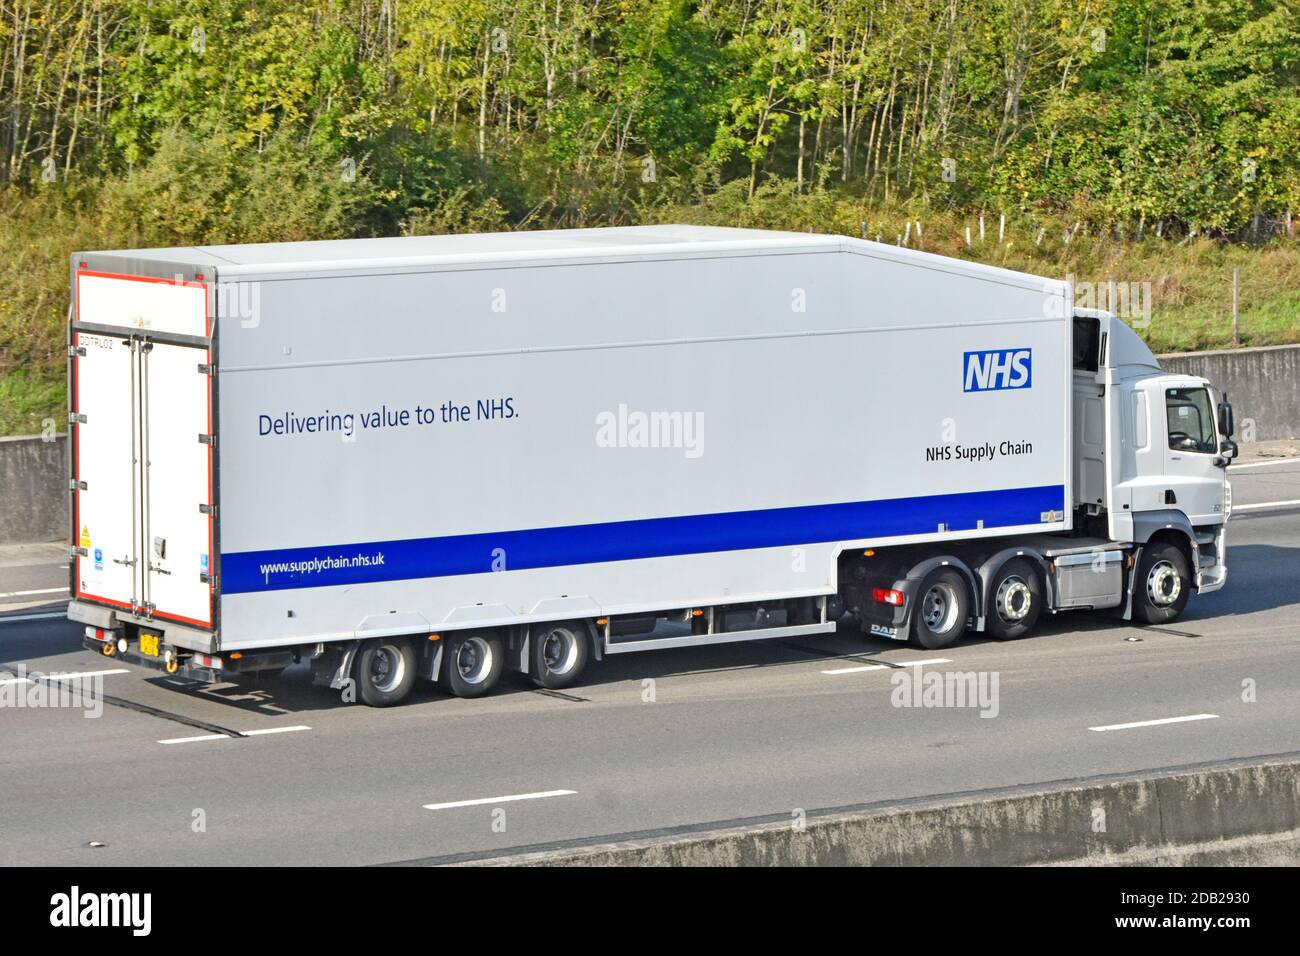 NHS supply chain hgv delivery lorry truck & articulated trailer delivering medical healthcare value to national health service driving on motorway UK Stock Photo